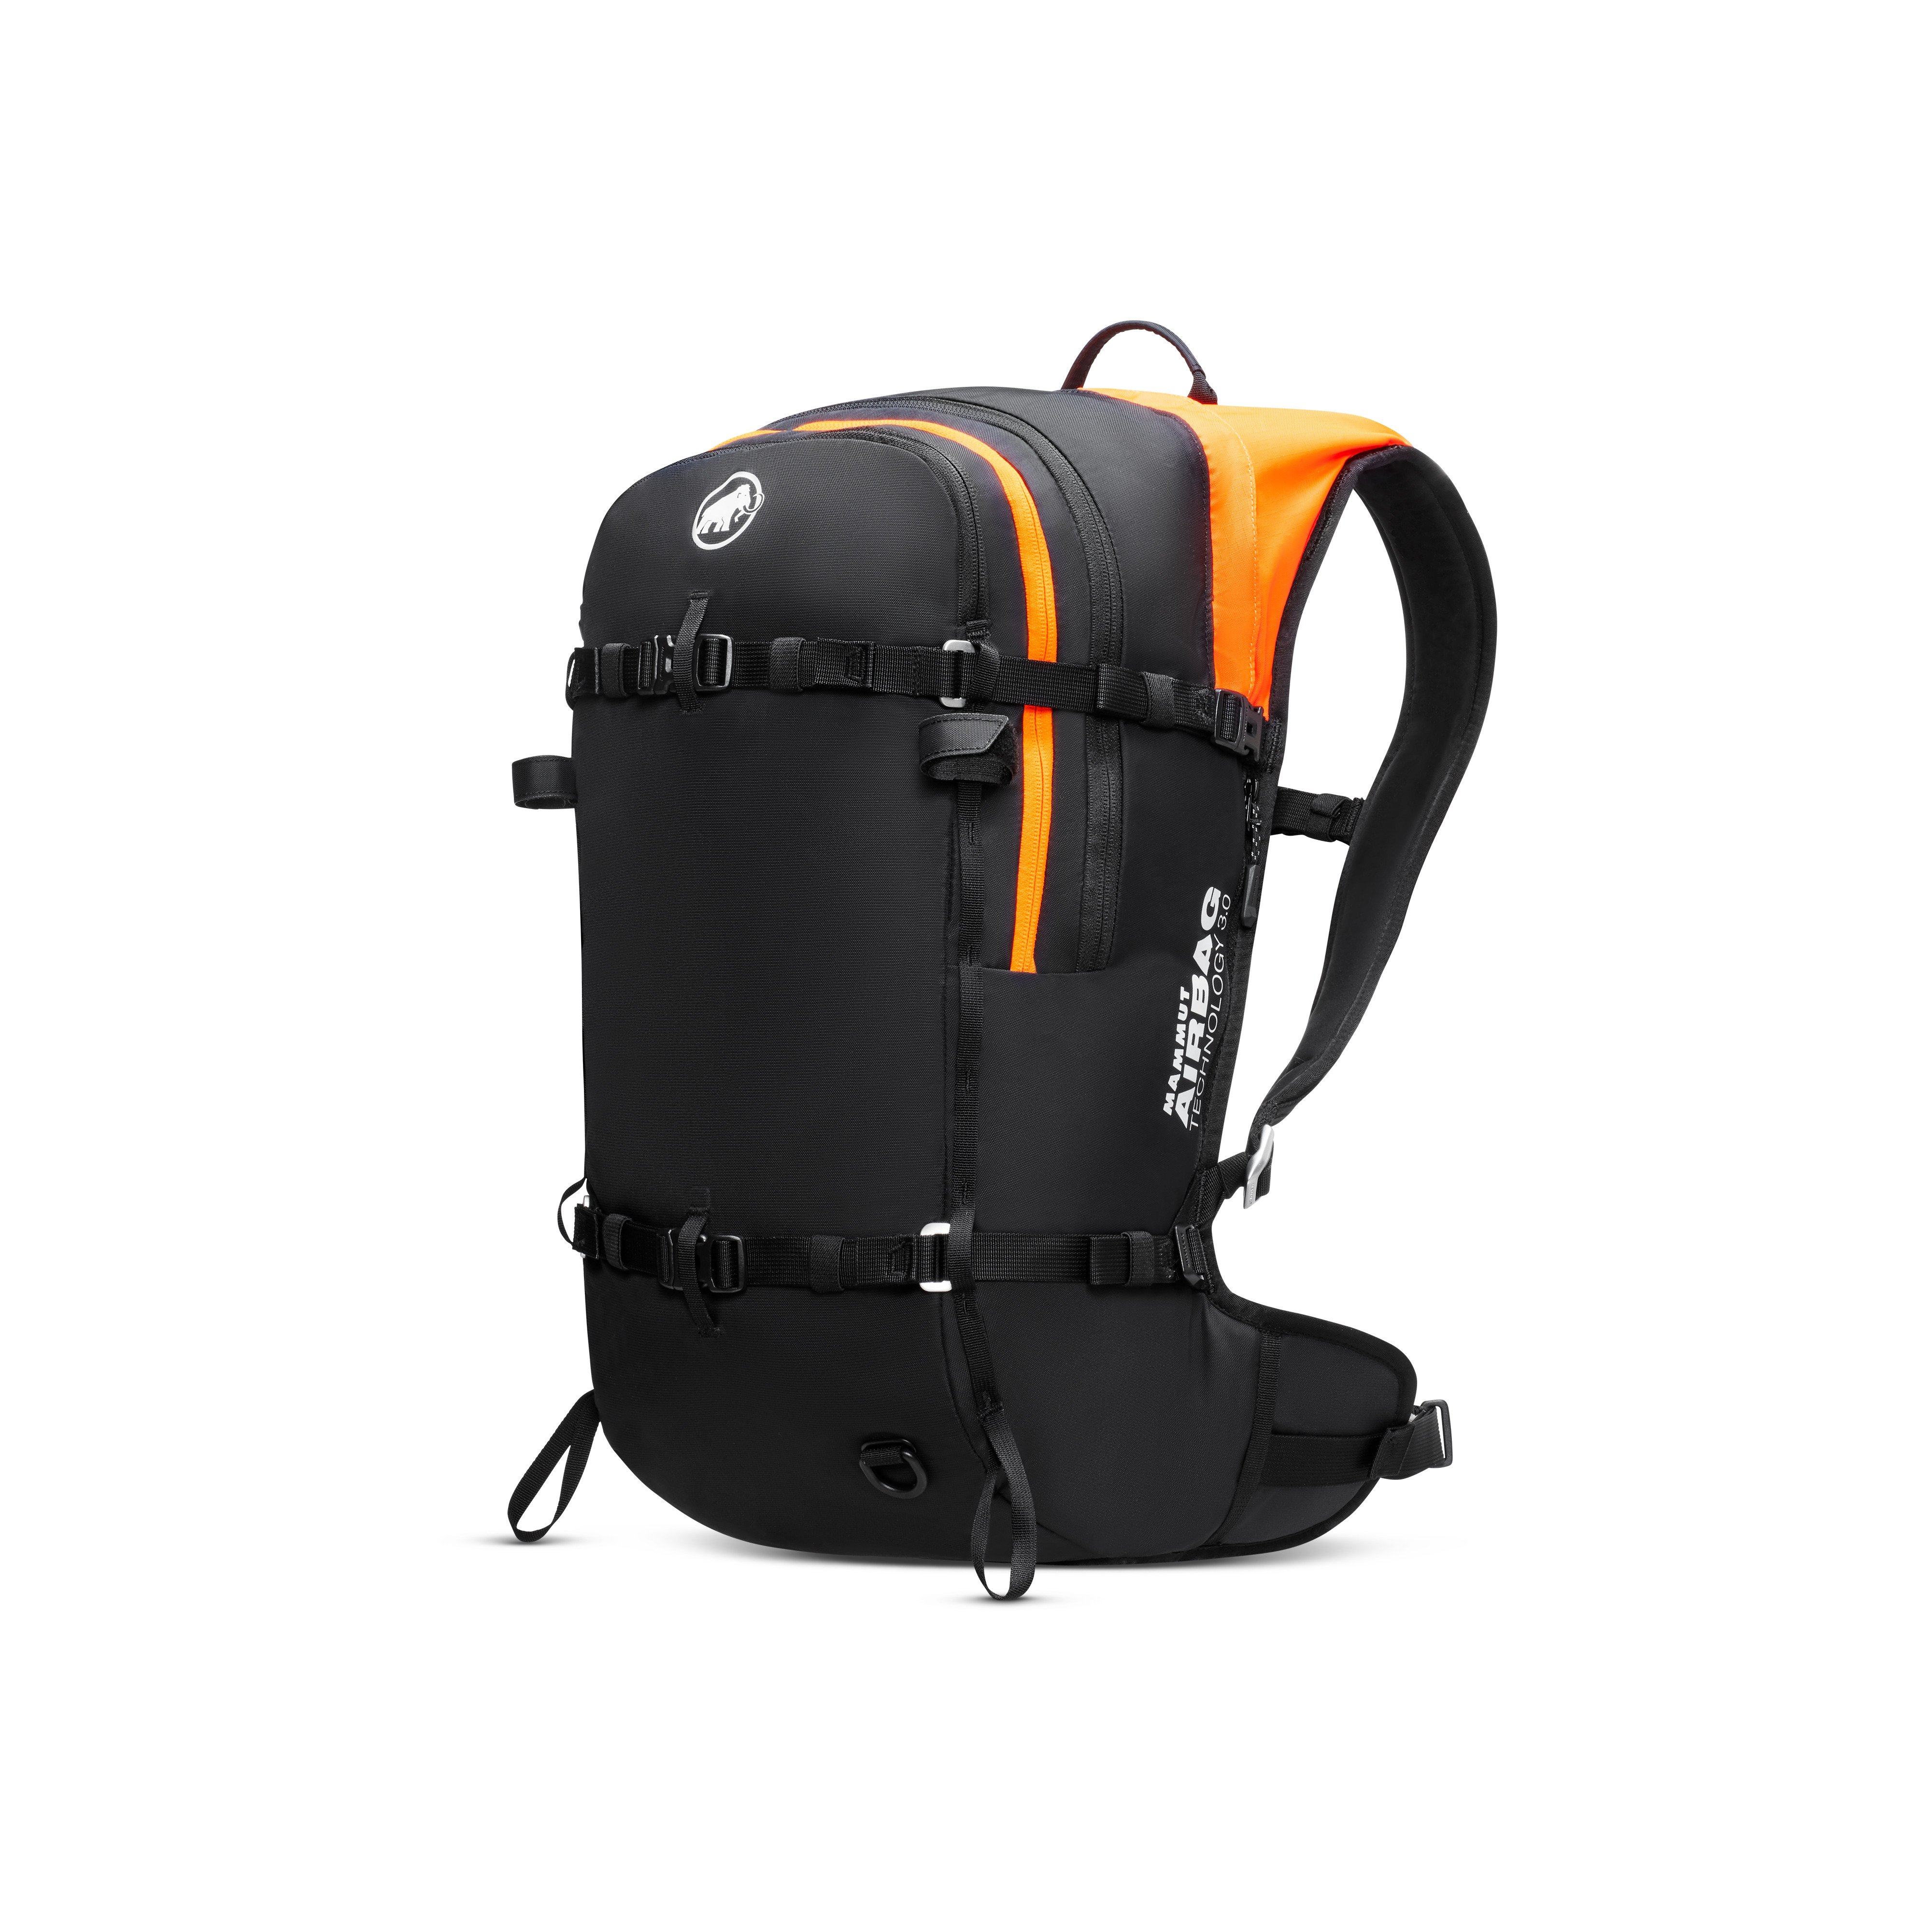 Free 28 Removable Airbag 3.0 ready - black, 28 L product image